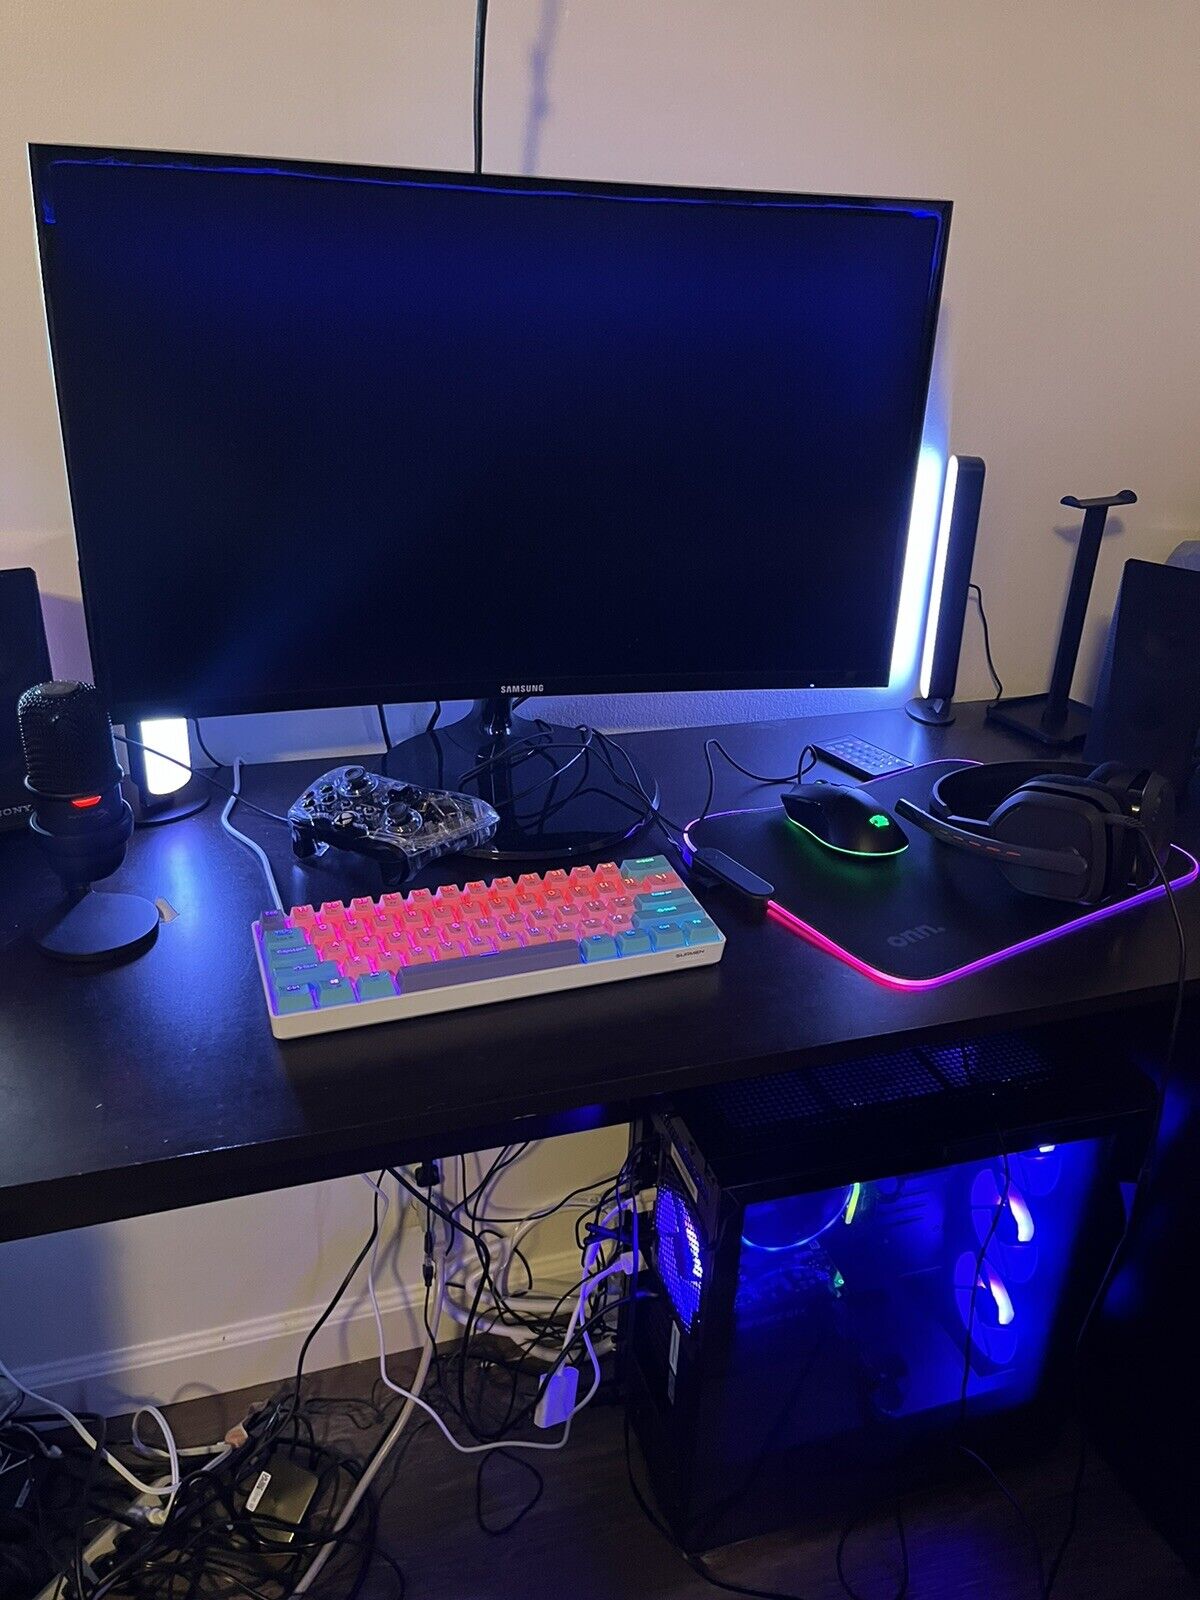 EVERYTHING IN PICTURE FOR SALE Whole Pc Setup